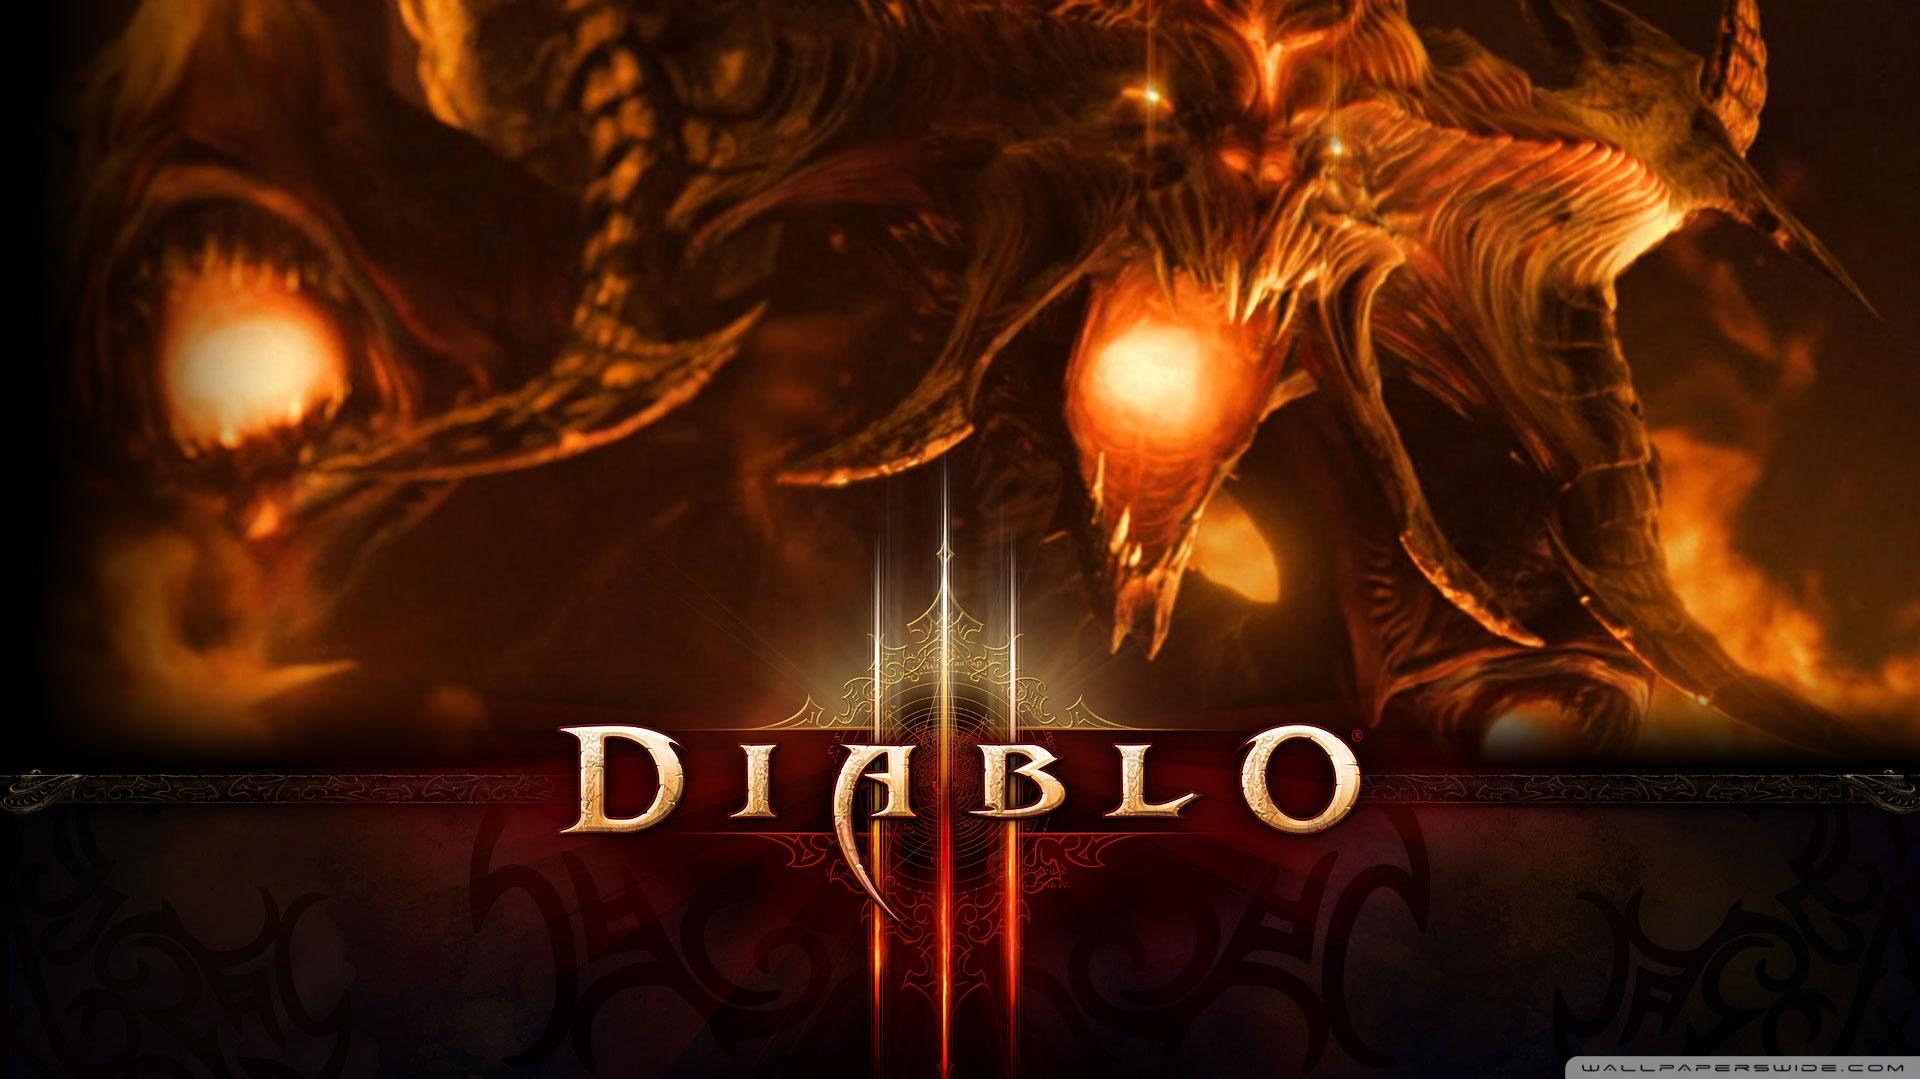 Diablo Iii Cinematic Shows Himself Rising From The Depths